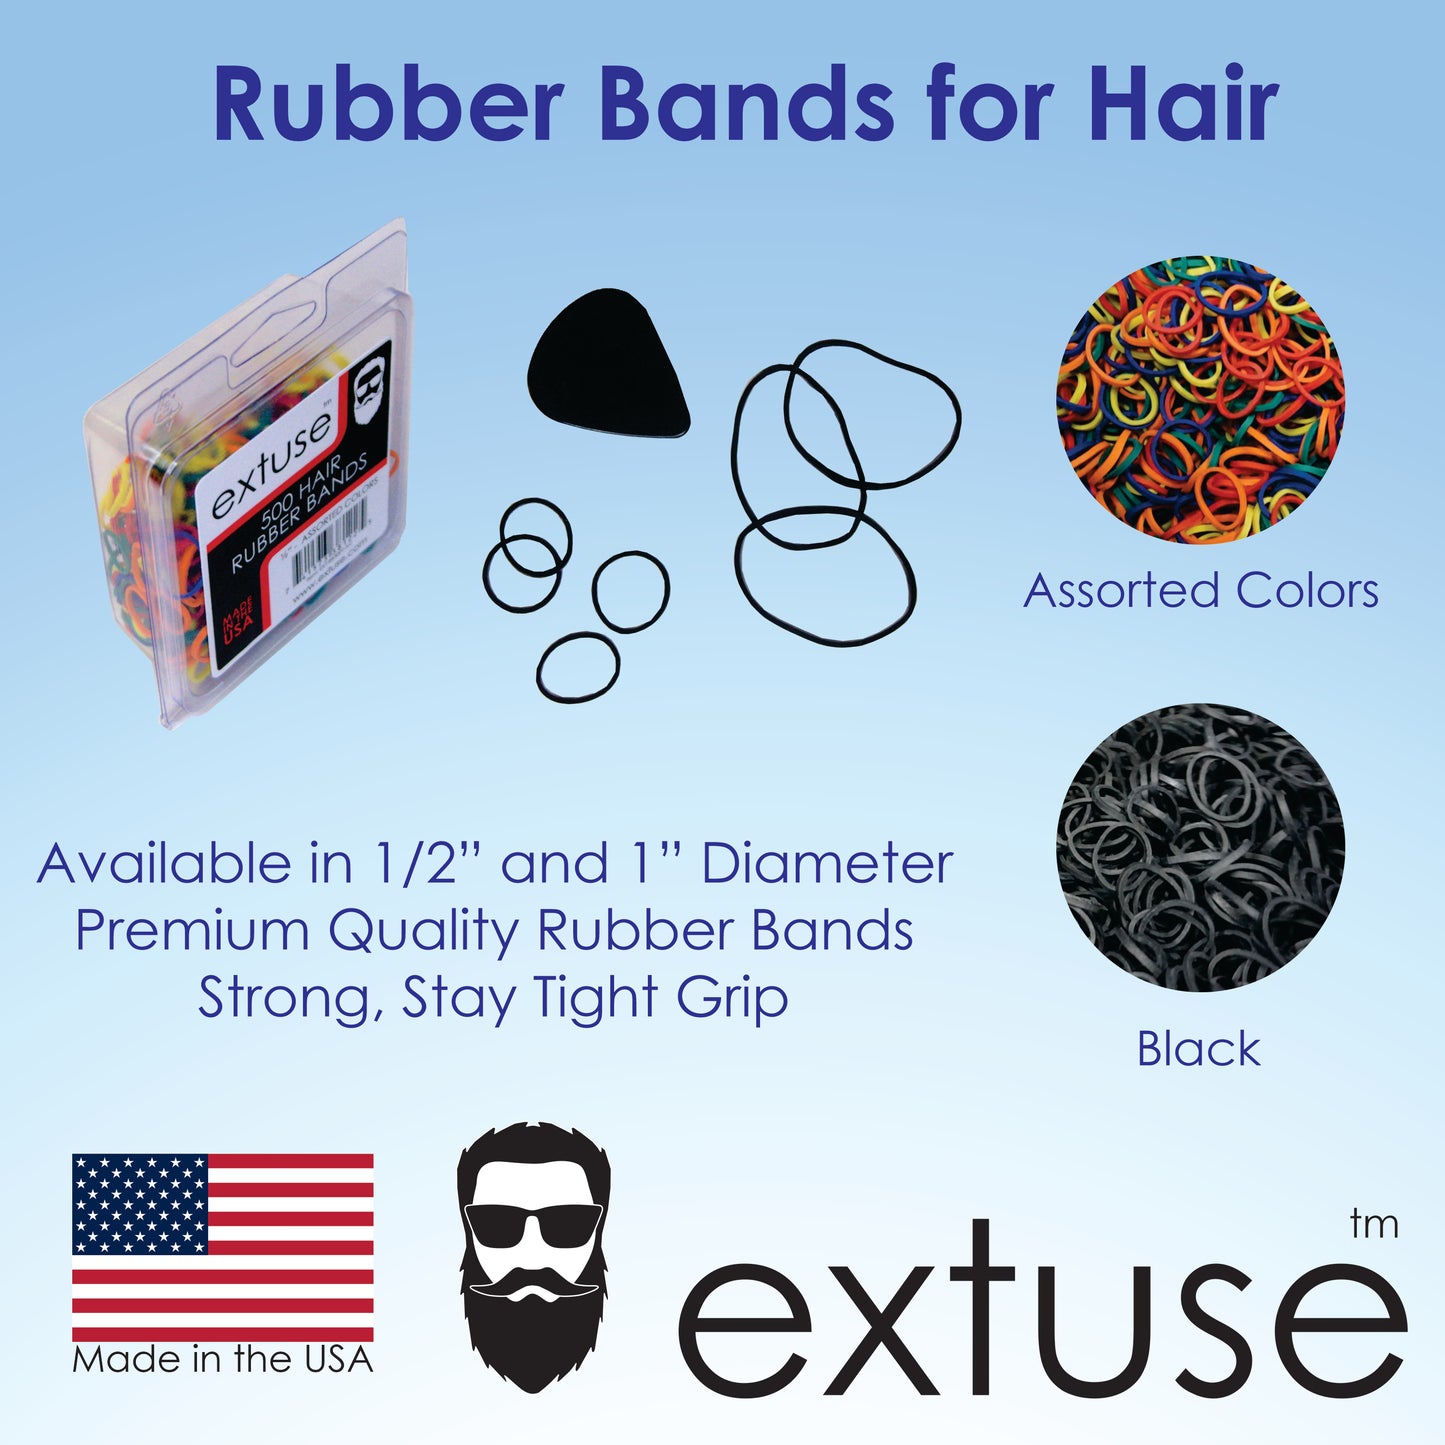 Extuse | 1/2in, Black, Elastic Rubber Band Pony Tail Holders | Made in USA, Ideal for Ponytails, Braids, Beards, Twists, Dreadlocks, Styling Accessories for All | 500 Pack